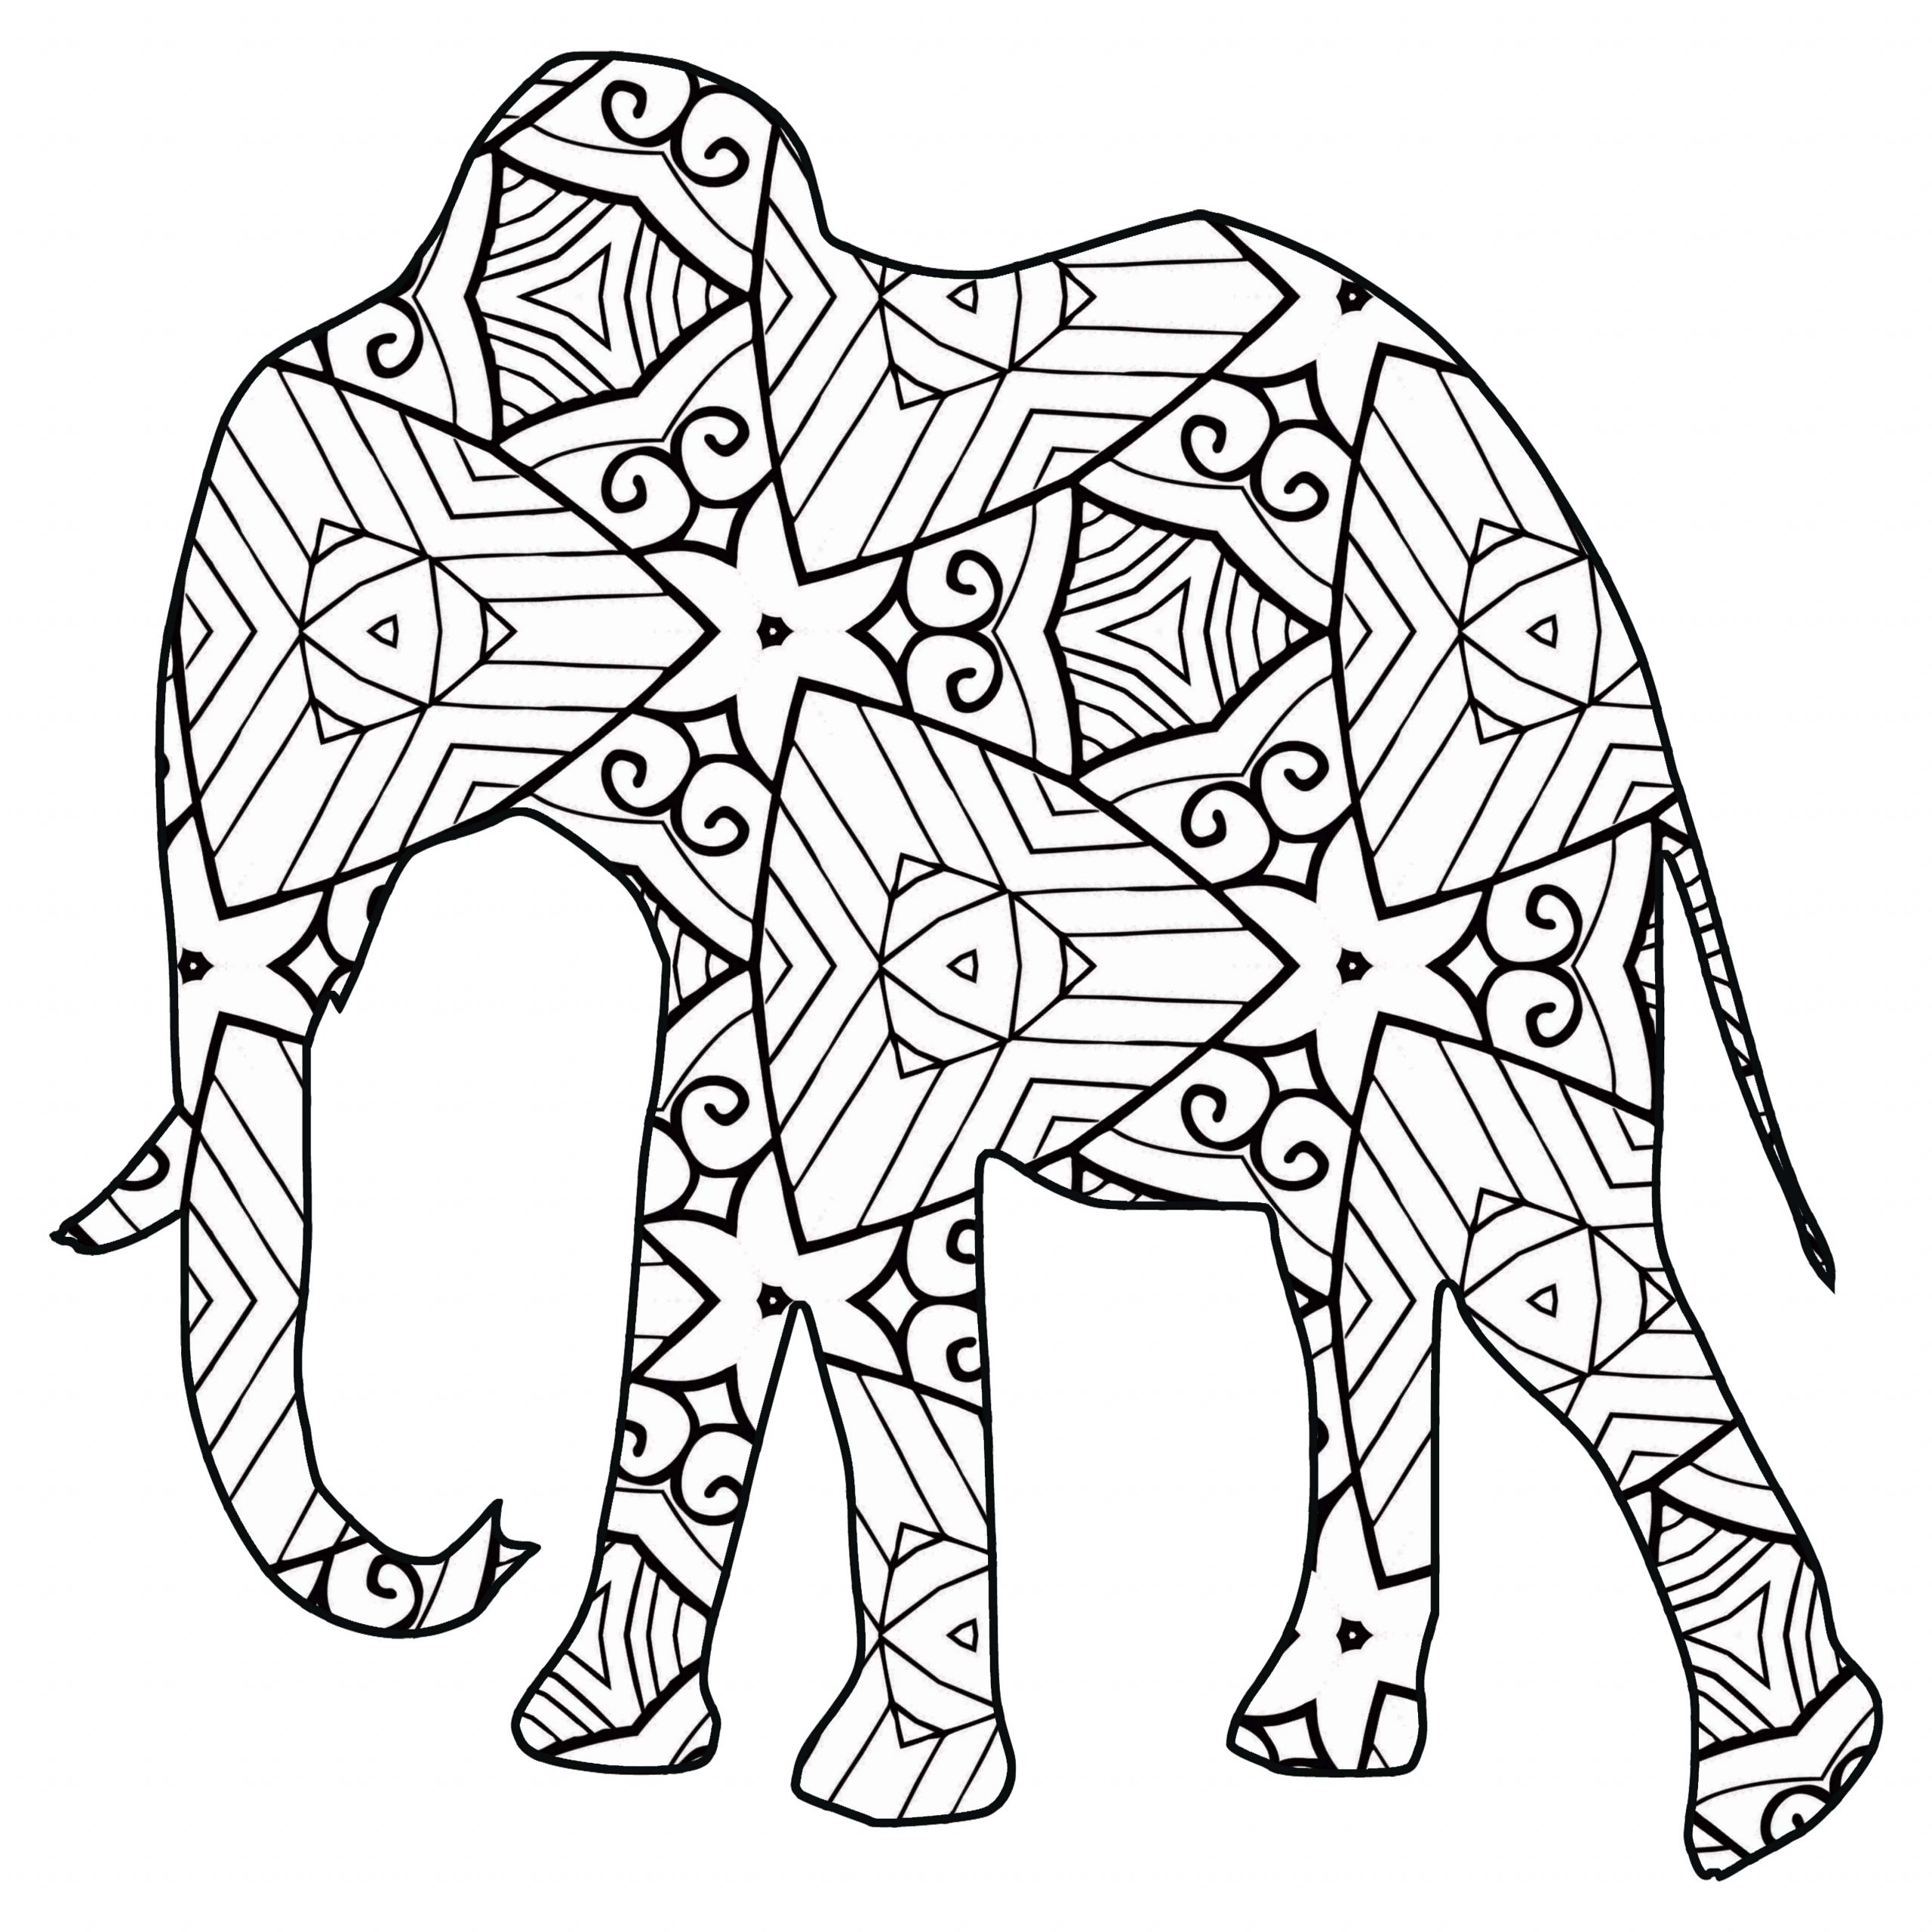 Printable Coloring Pages Animals
 30 Free Printable Geometric Animal Coloring Pages